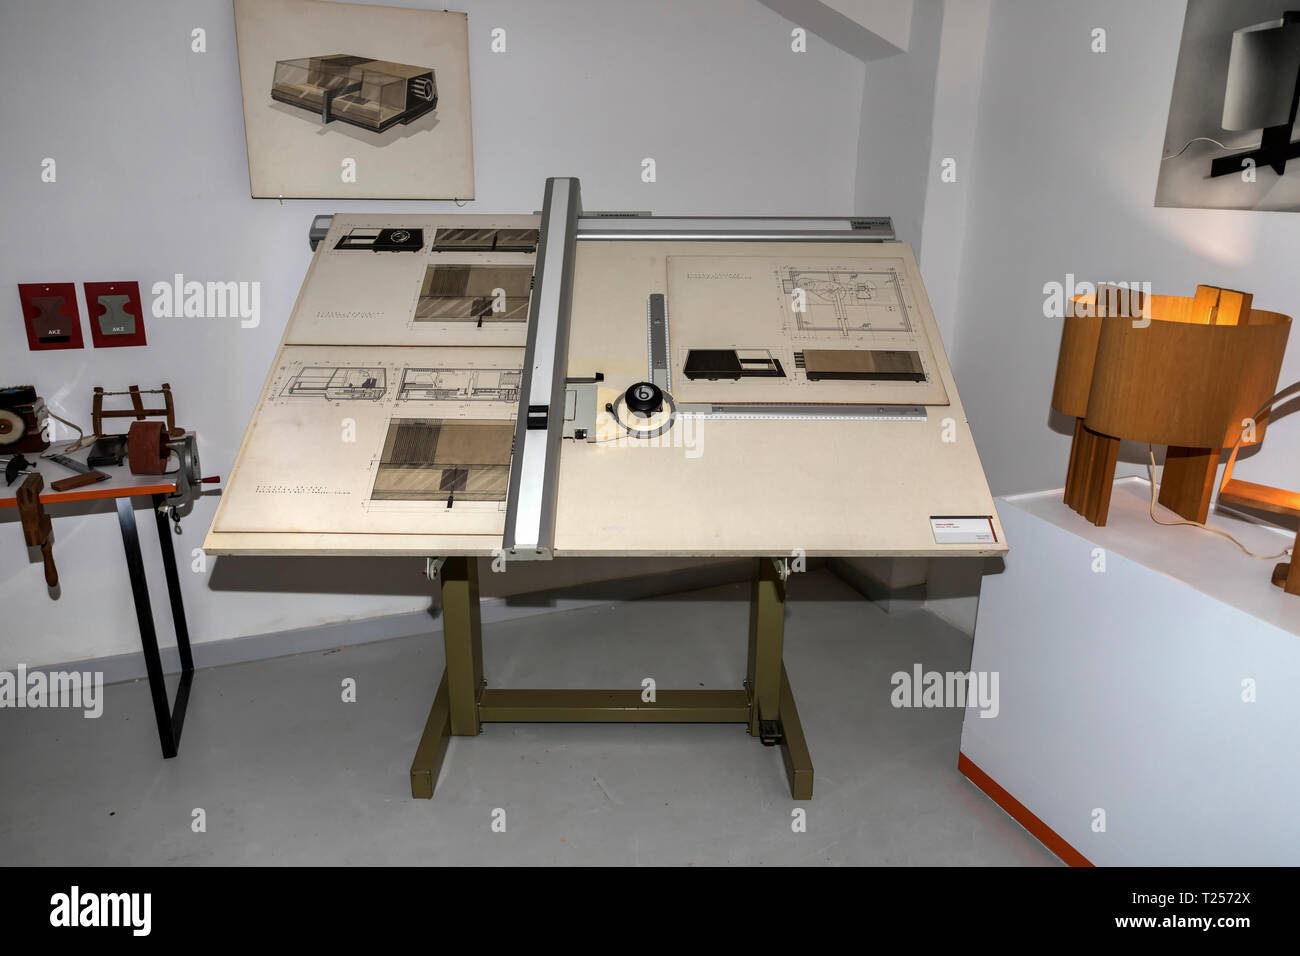 Belgrade, Serbia, March 2019 - Old-fashioned drawing board with project blueprint exposed in the Museum of Science and Technology Stock Photo